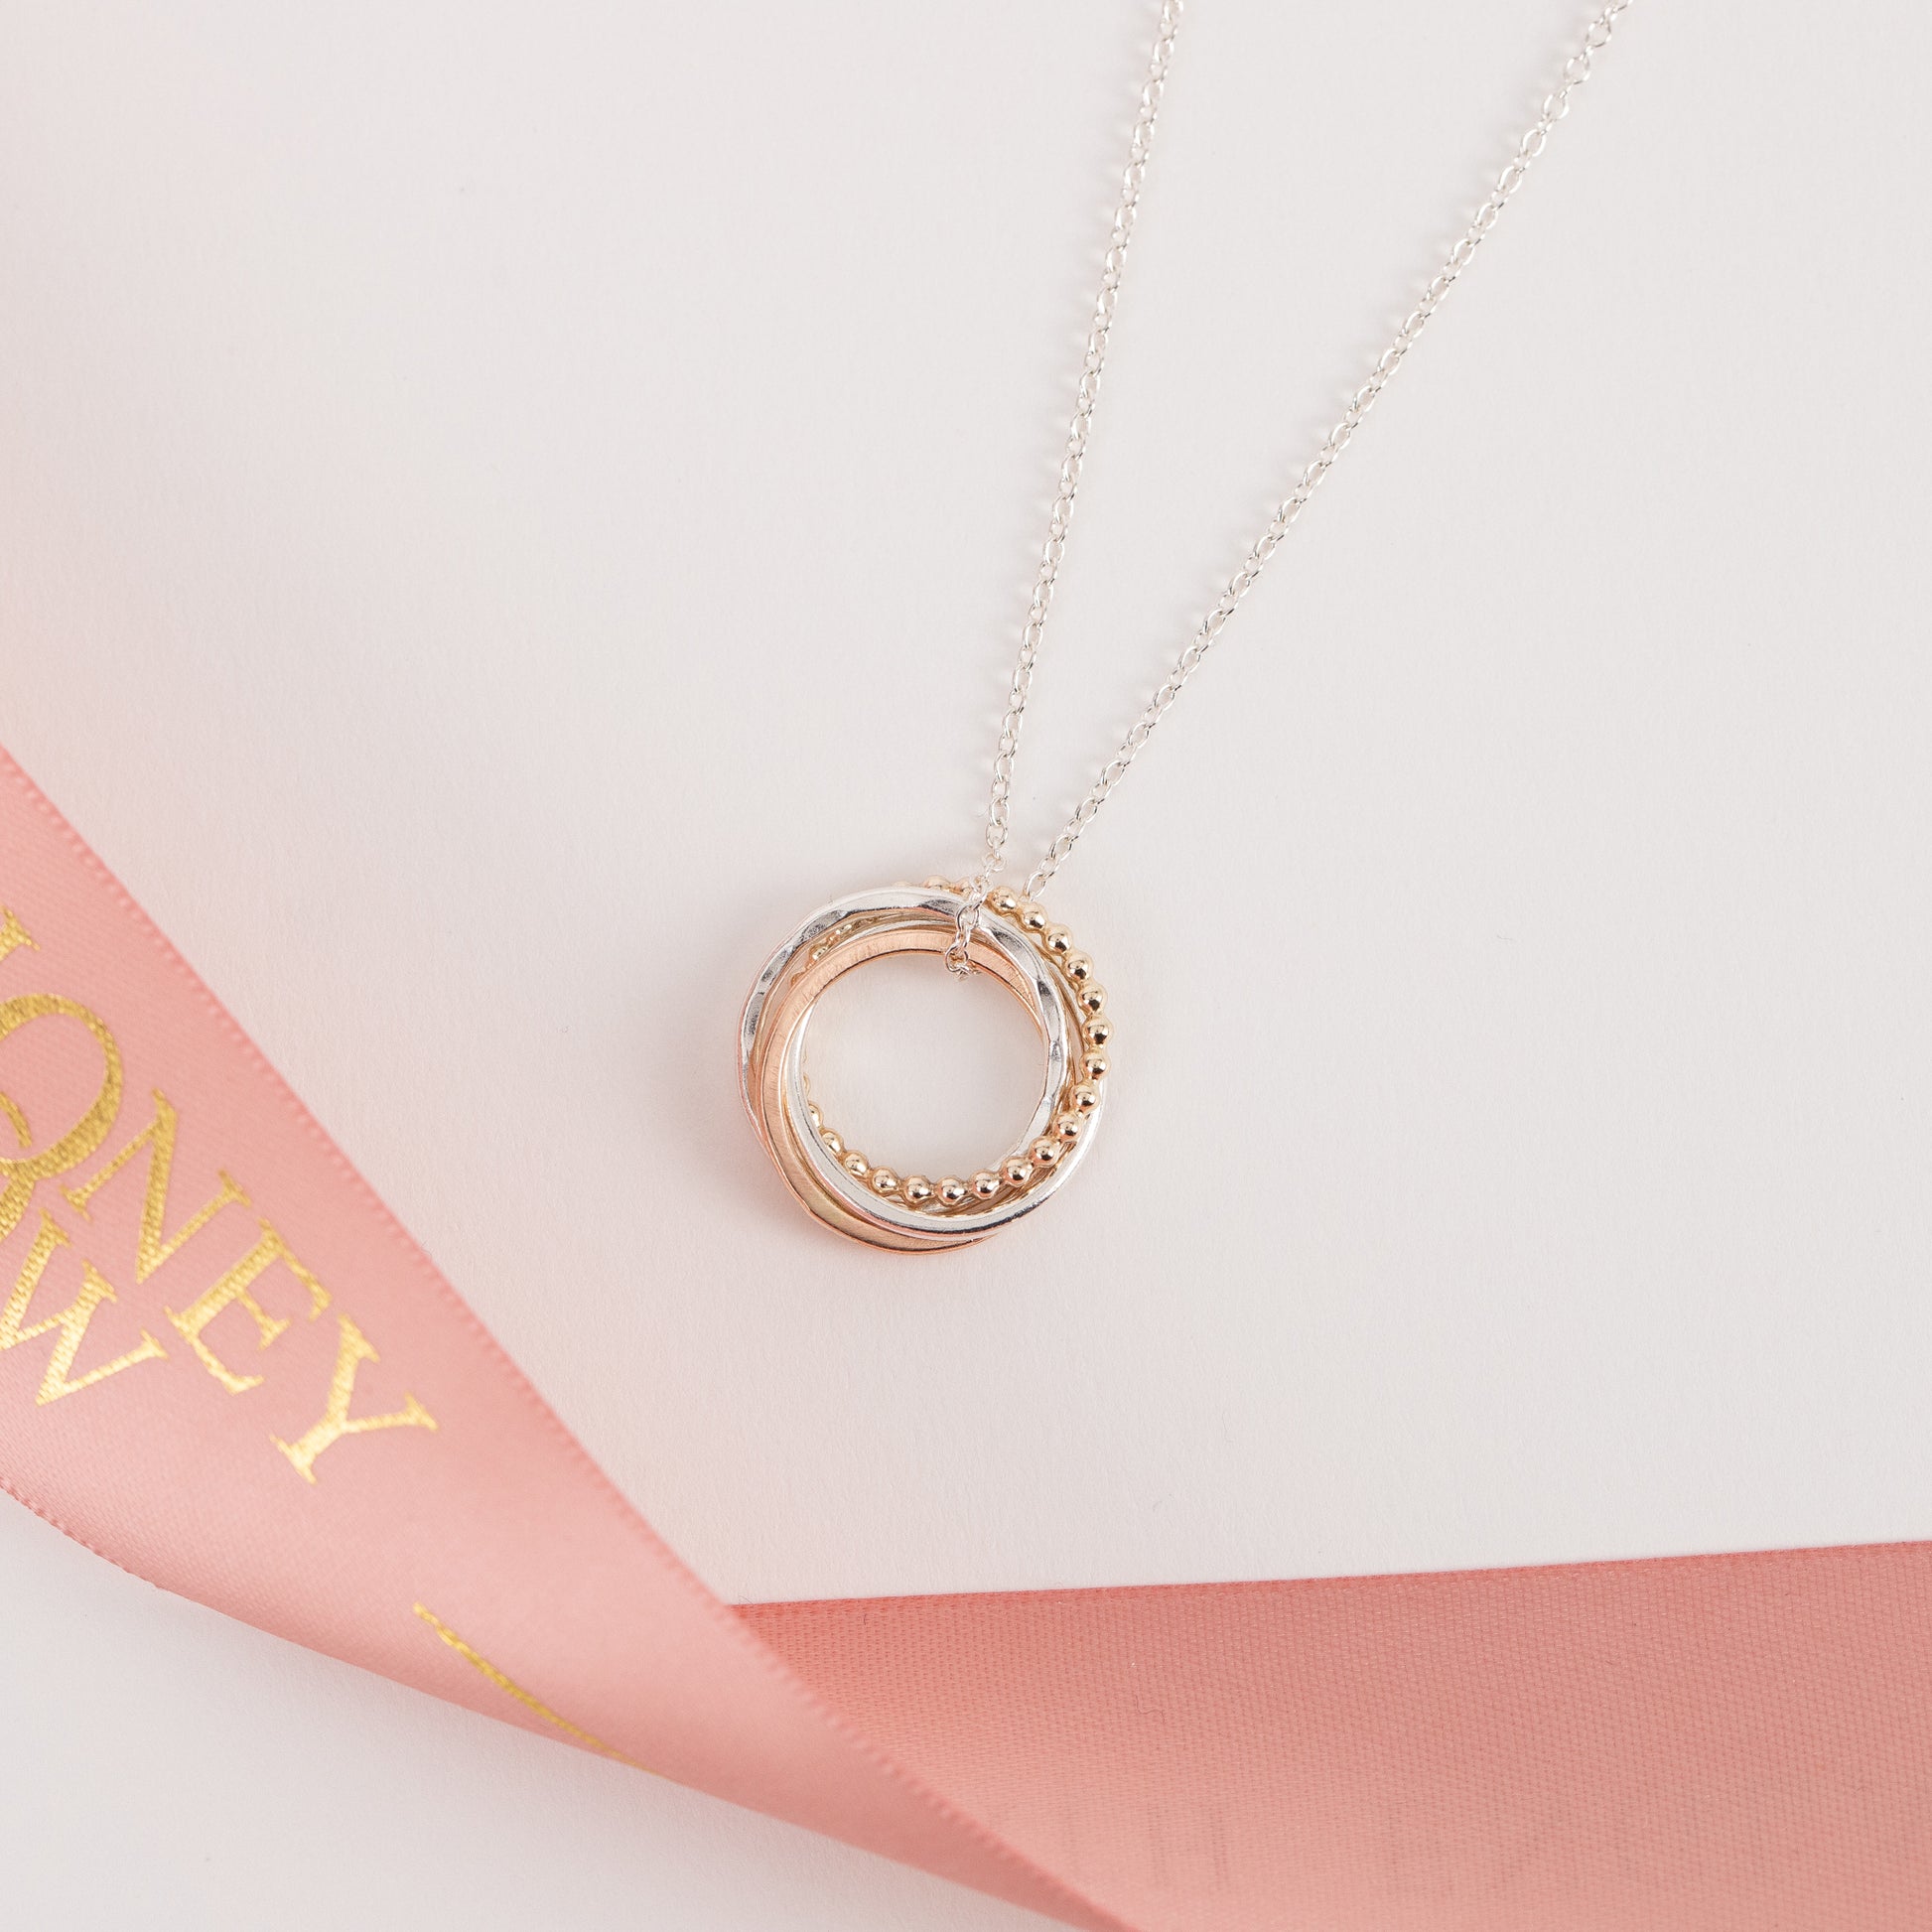 40th Birthday Necklace - The Original 4 Links for 4 Decades Necklace - Petite 9kt Gold, Rose Gold, Silver